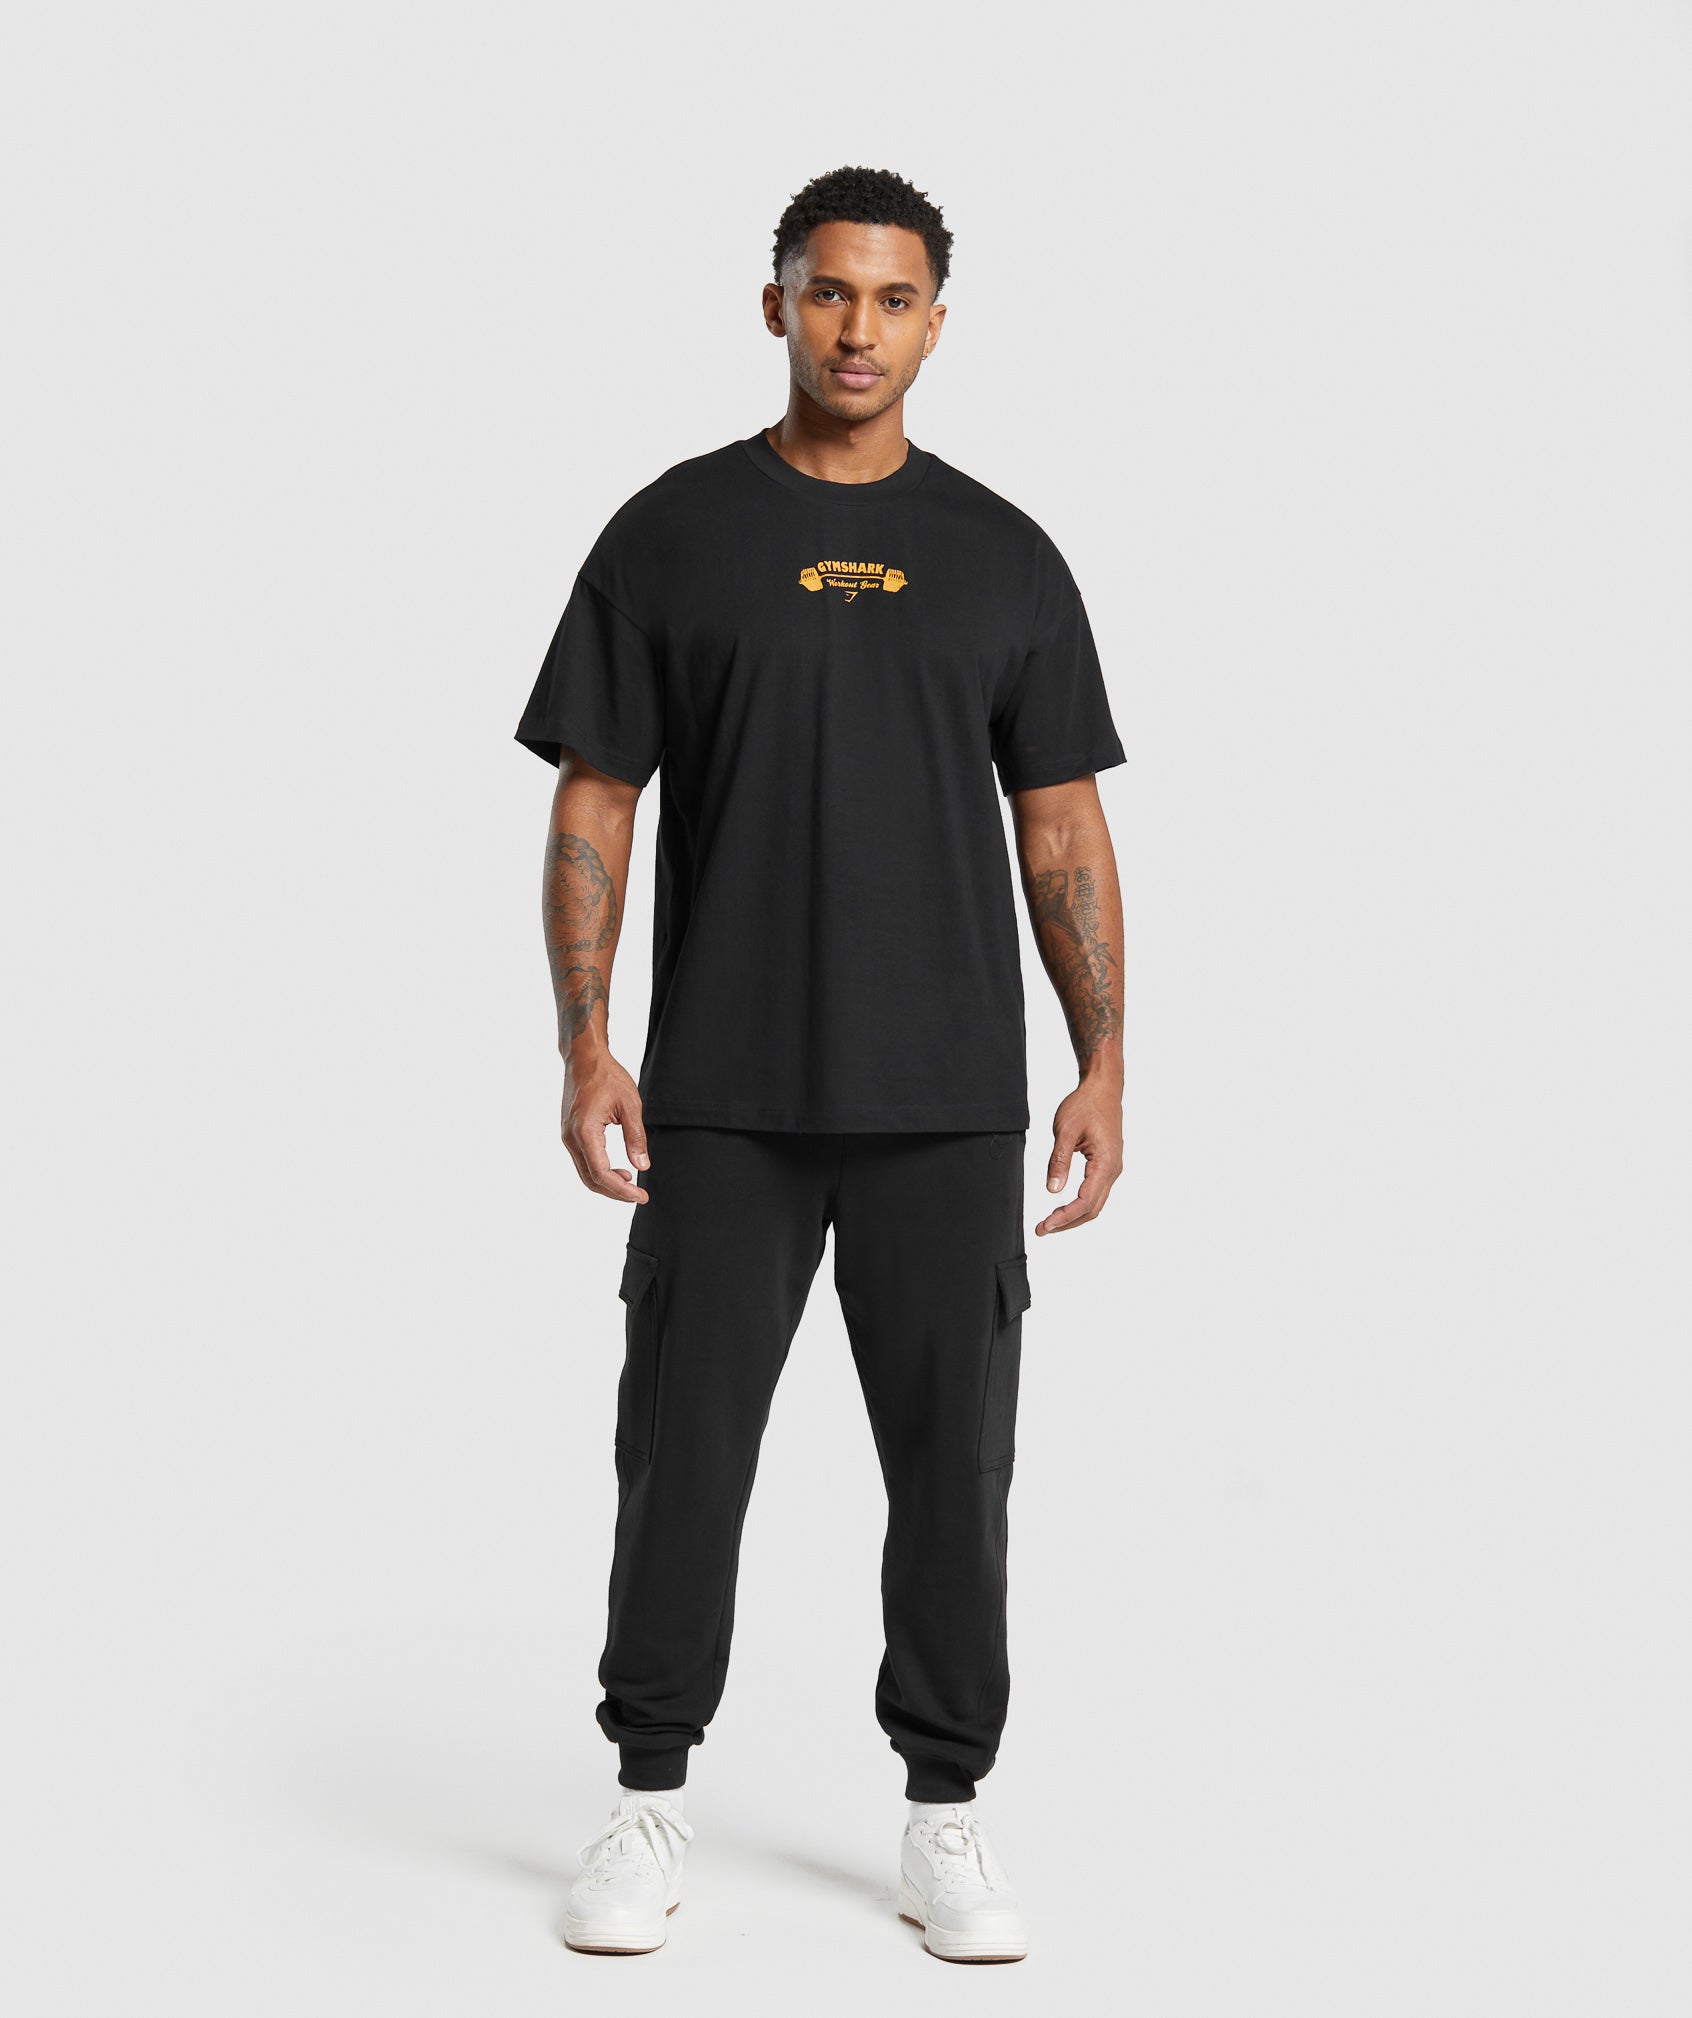 Workout Gear T-Shirt in Black - view 4